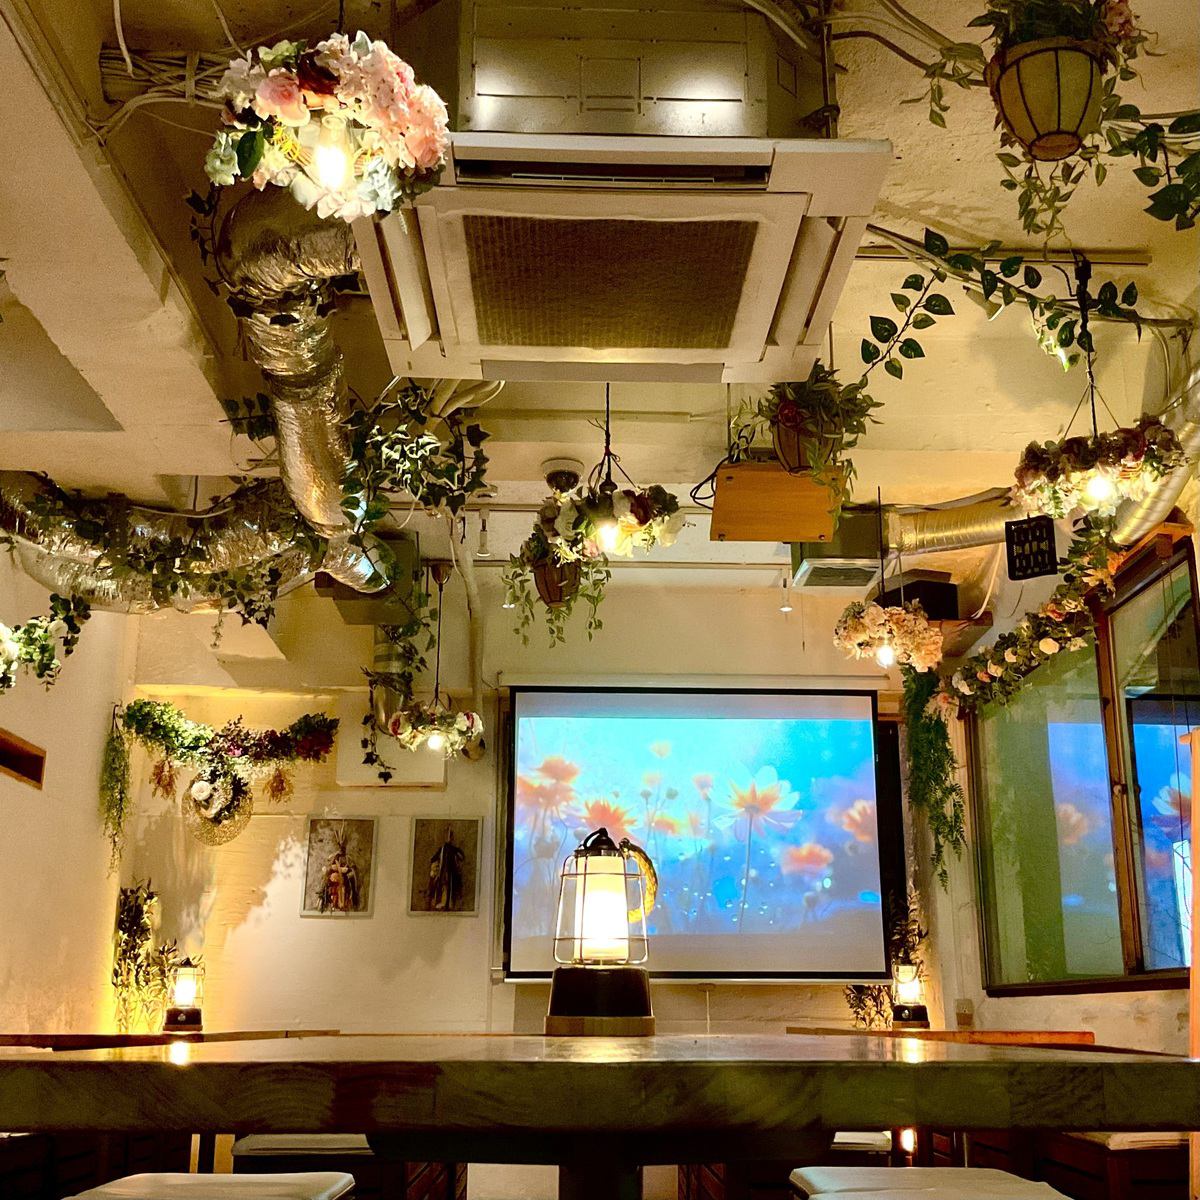 Shibuya Garden Room has two floors: the stylish 3rd floor and the 4th floor with a terrace! Both are party spaces specialized for private parties, so leave it to Shibuya Garden Room if you're looking for a private party in Shibuya!